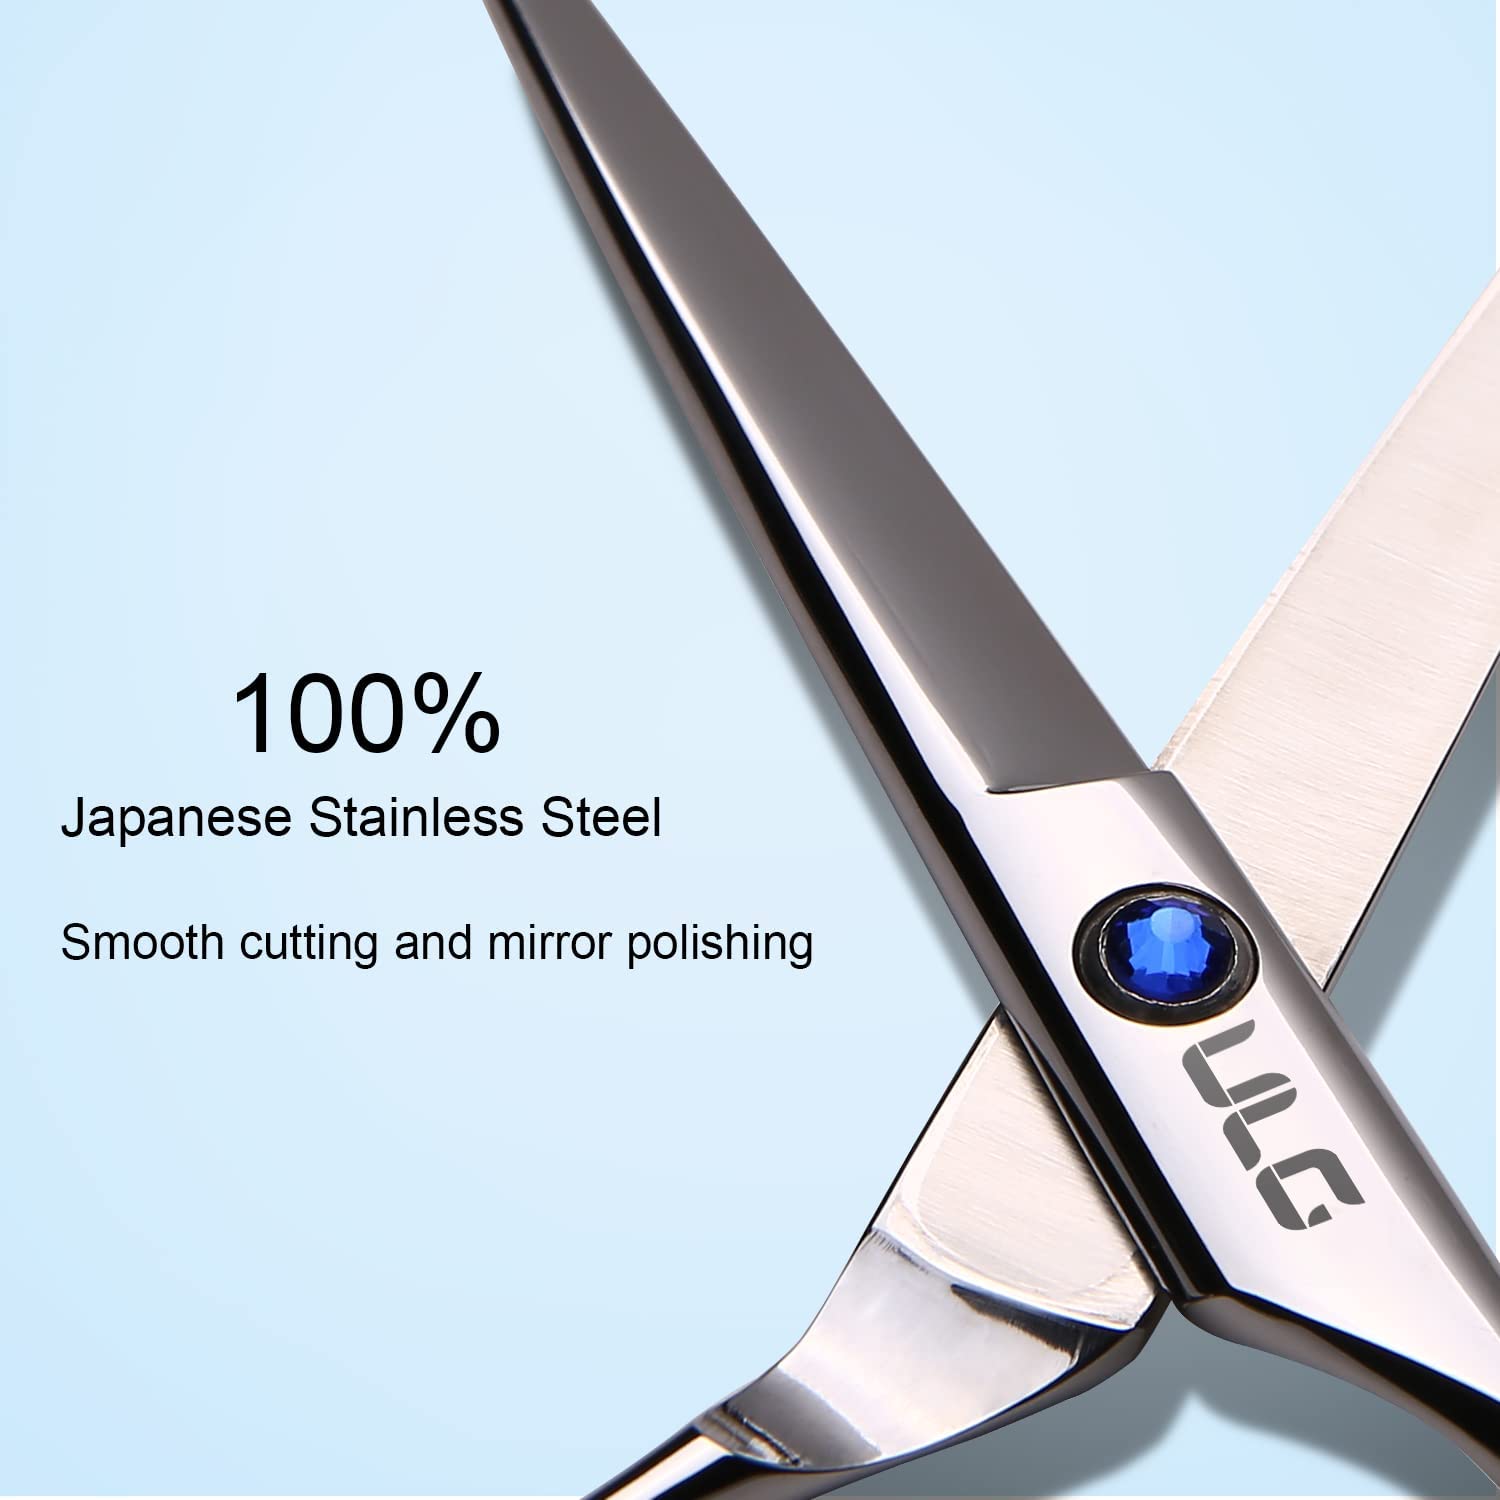 Facón Professional Razor Edge Barber Hair Cutting Scissors - Japanese  Stainless Steel - 6.5 Length - Fine Adjustment Tension Screw - Salon  Quality Premium Shears (The Alpha) 6.5 Inch (Pack of 1)